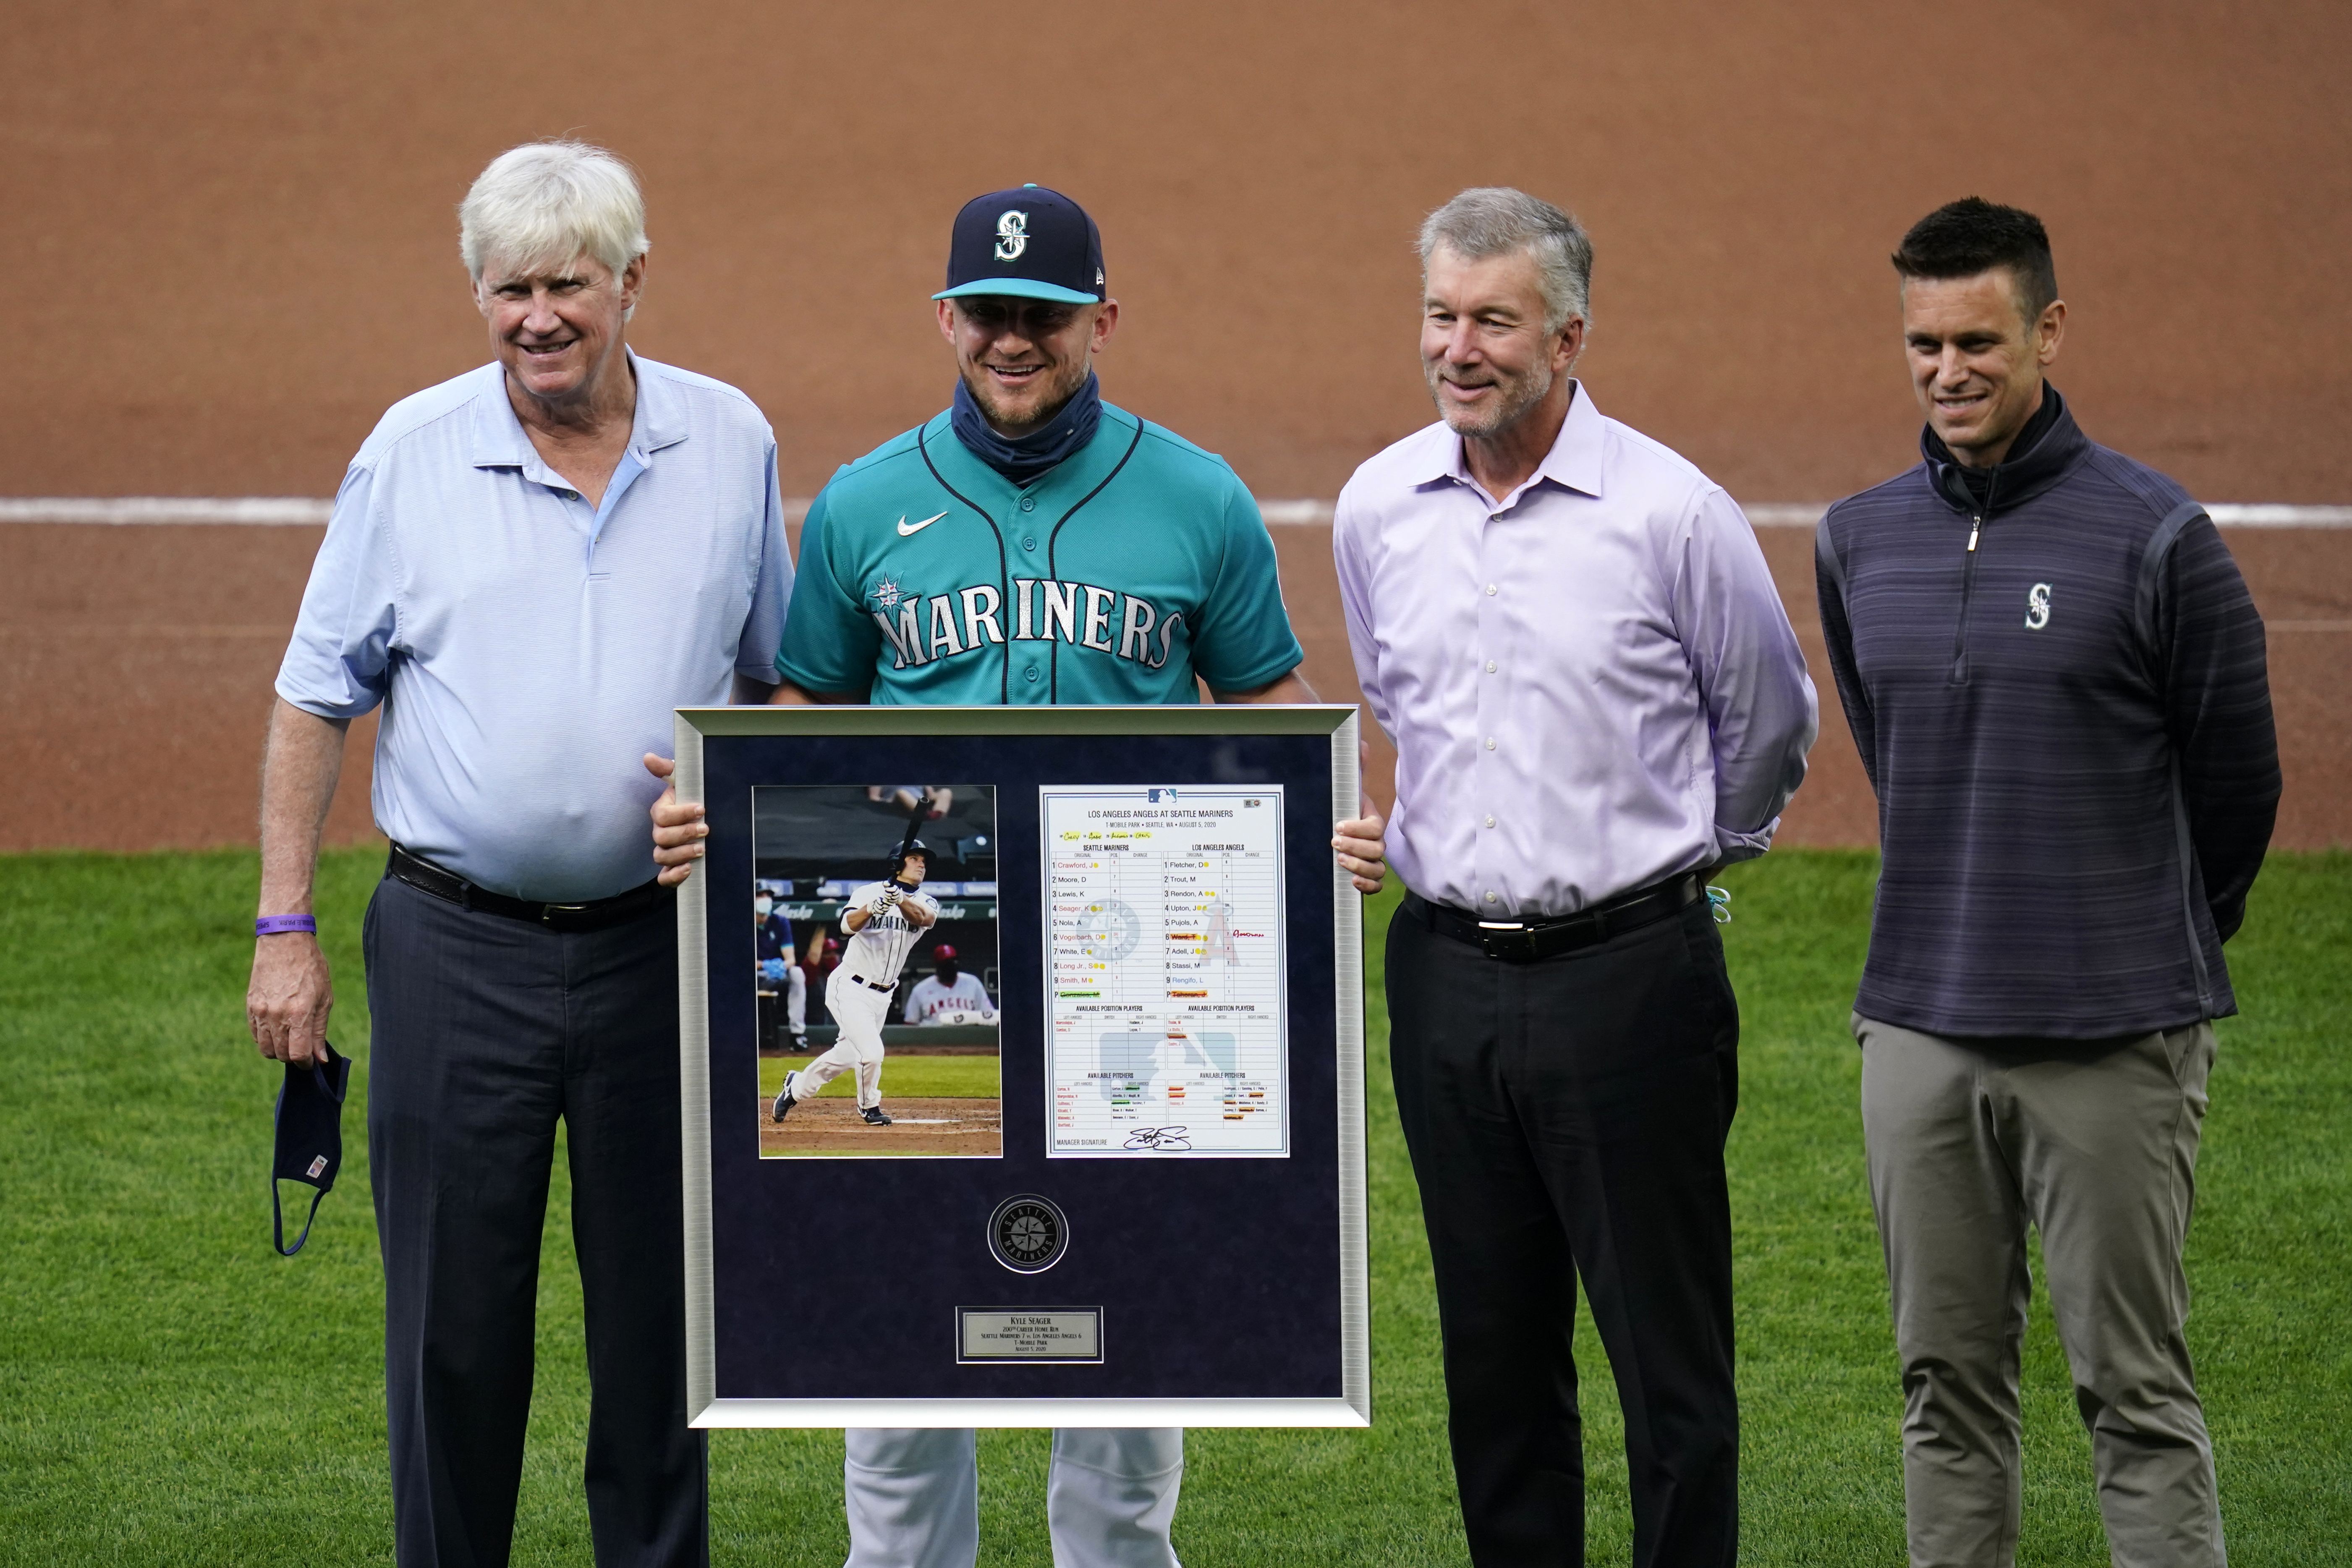 He Cleans Up Well: Kyle Seager is getting things done for the